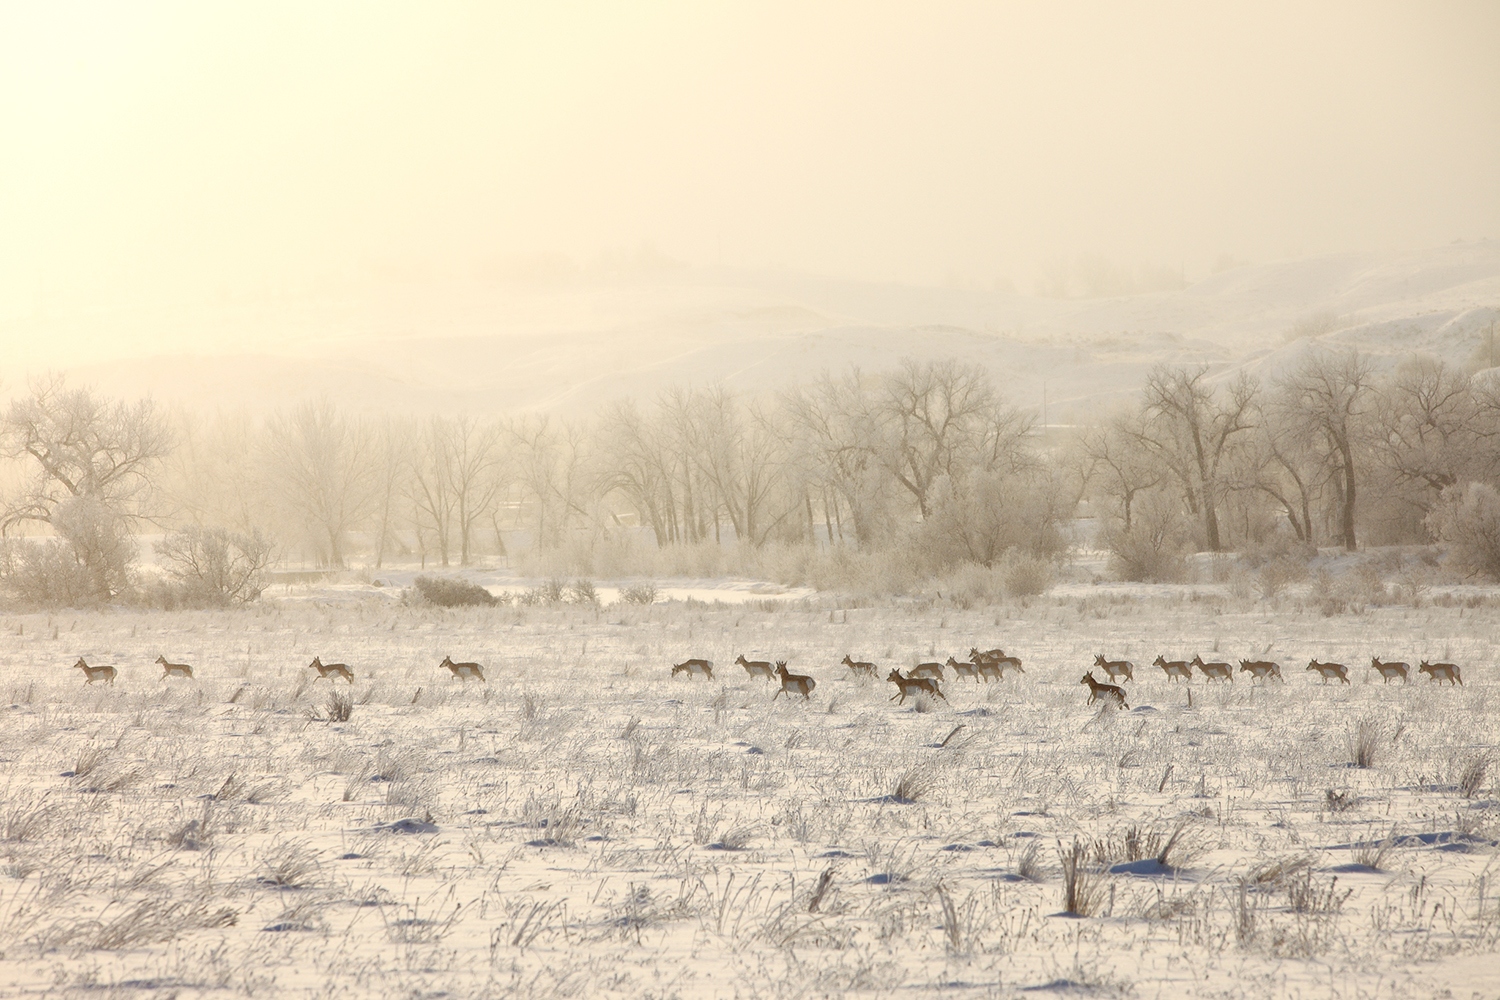 A large herd of pronghorn antelope run across a snowy field near just within the city limits of Havre, Montana.&nbsp;→ Buy This Print